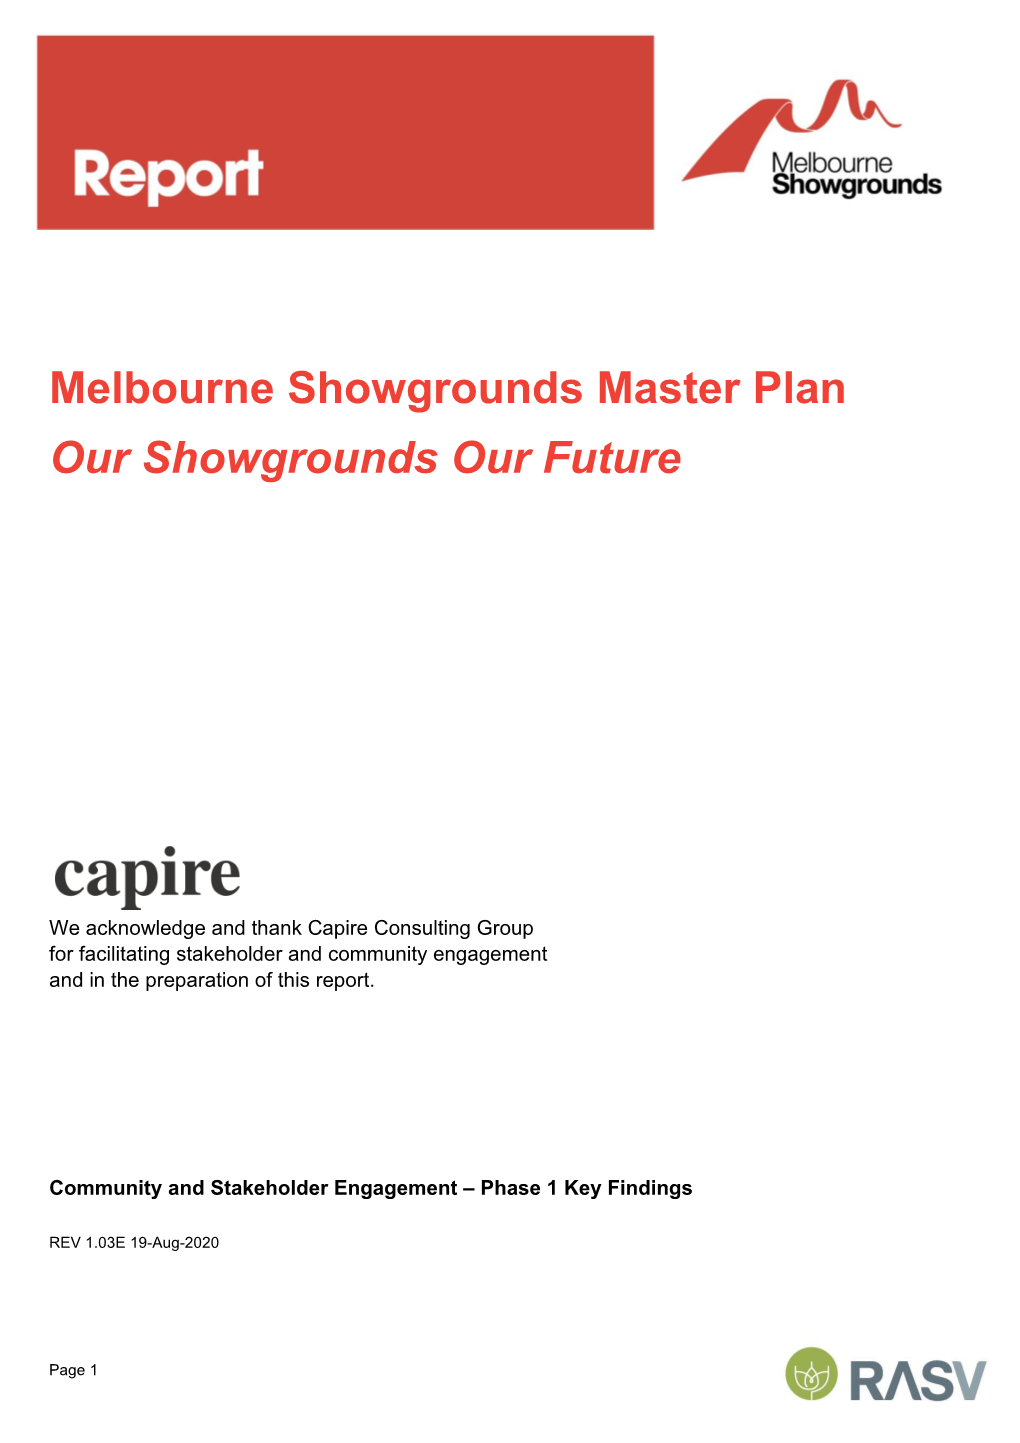 Melbourne Showgrounds Master Plan Our Showgrounds Our Future